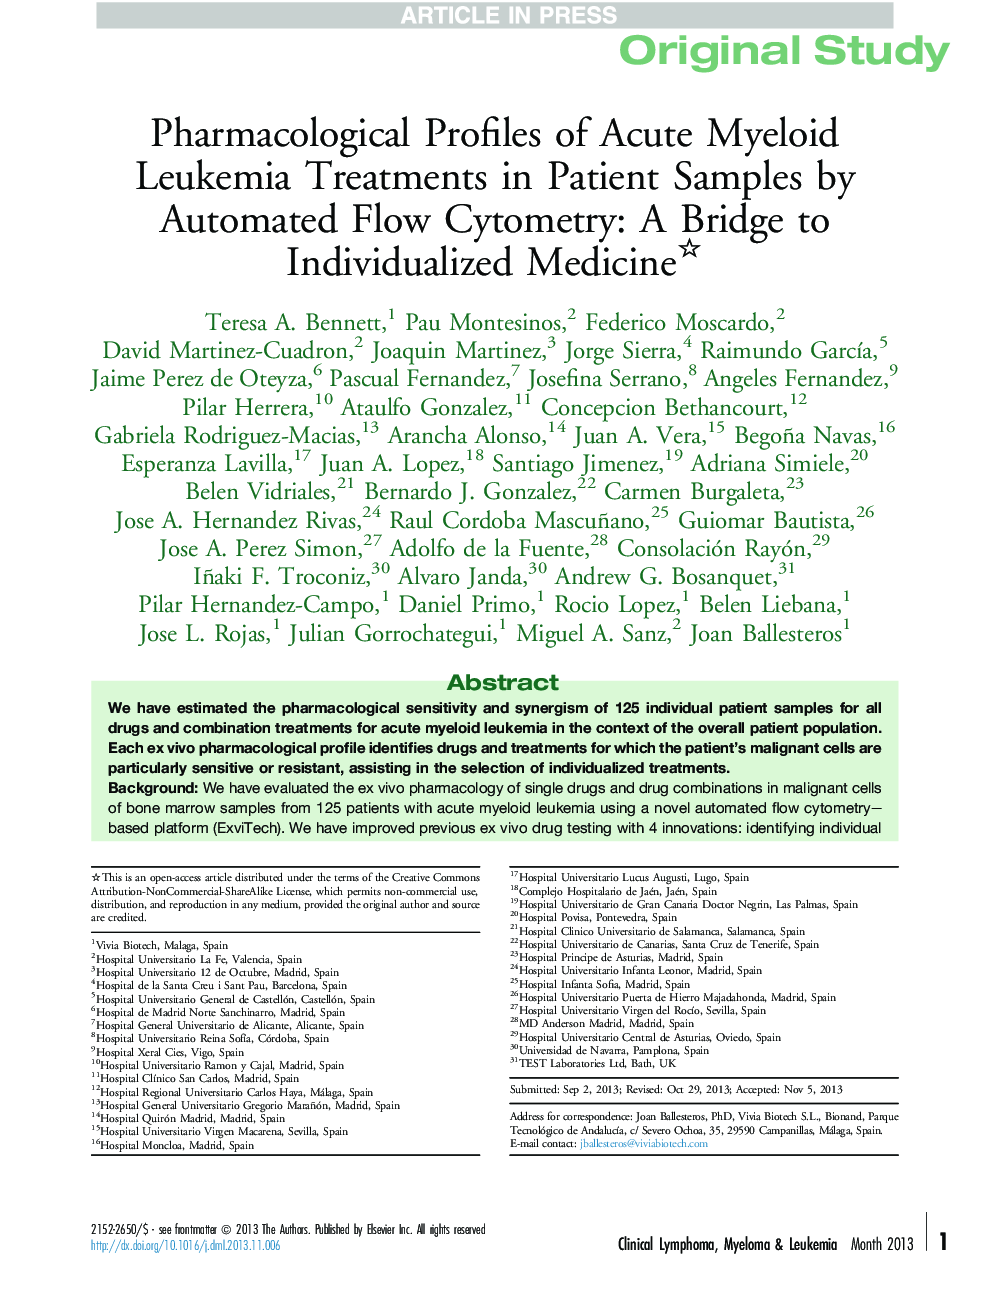 Pharmacological Profiles of Acute Myeloid Leukemia Treatments in Patient Samples by Automated Flow Cytometry: A Bridge to Individualized Medicine